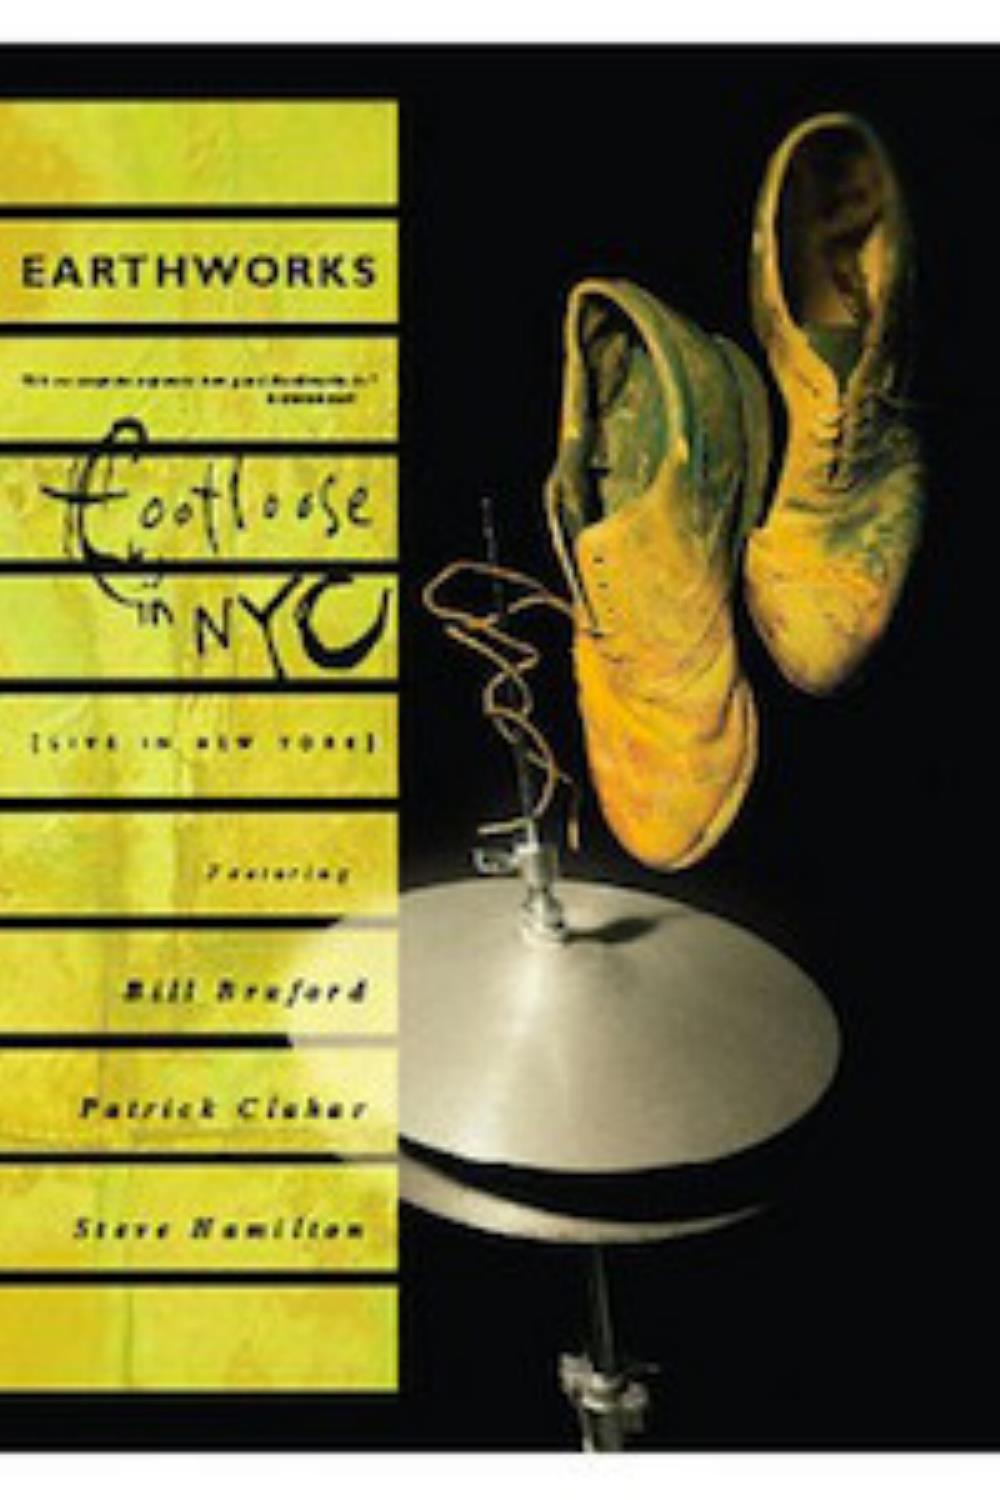  Footloose in NYC by BRUFORD'S EARTHWORKS, BILL album cover